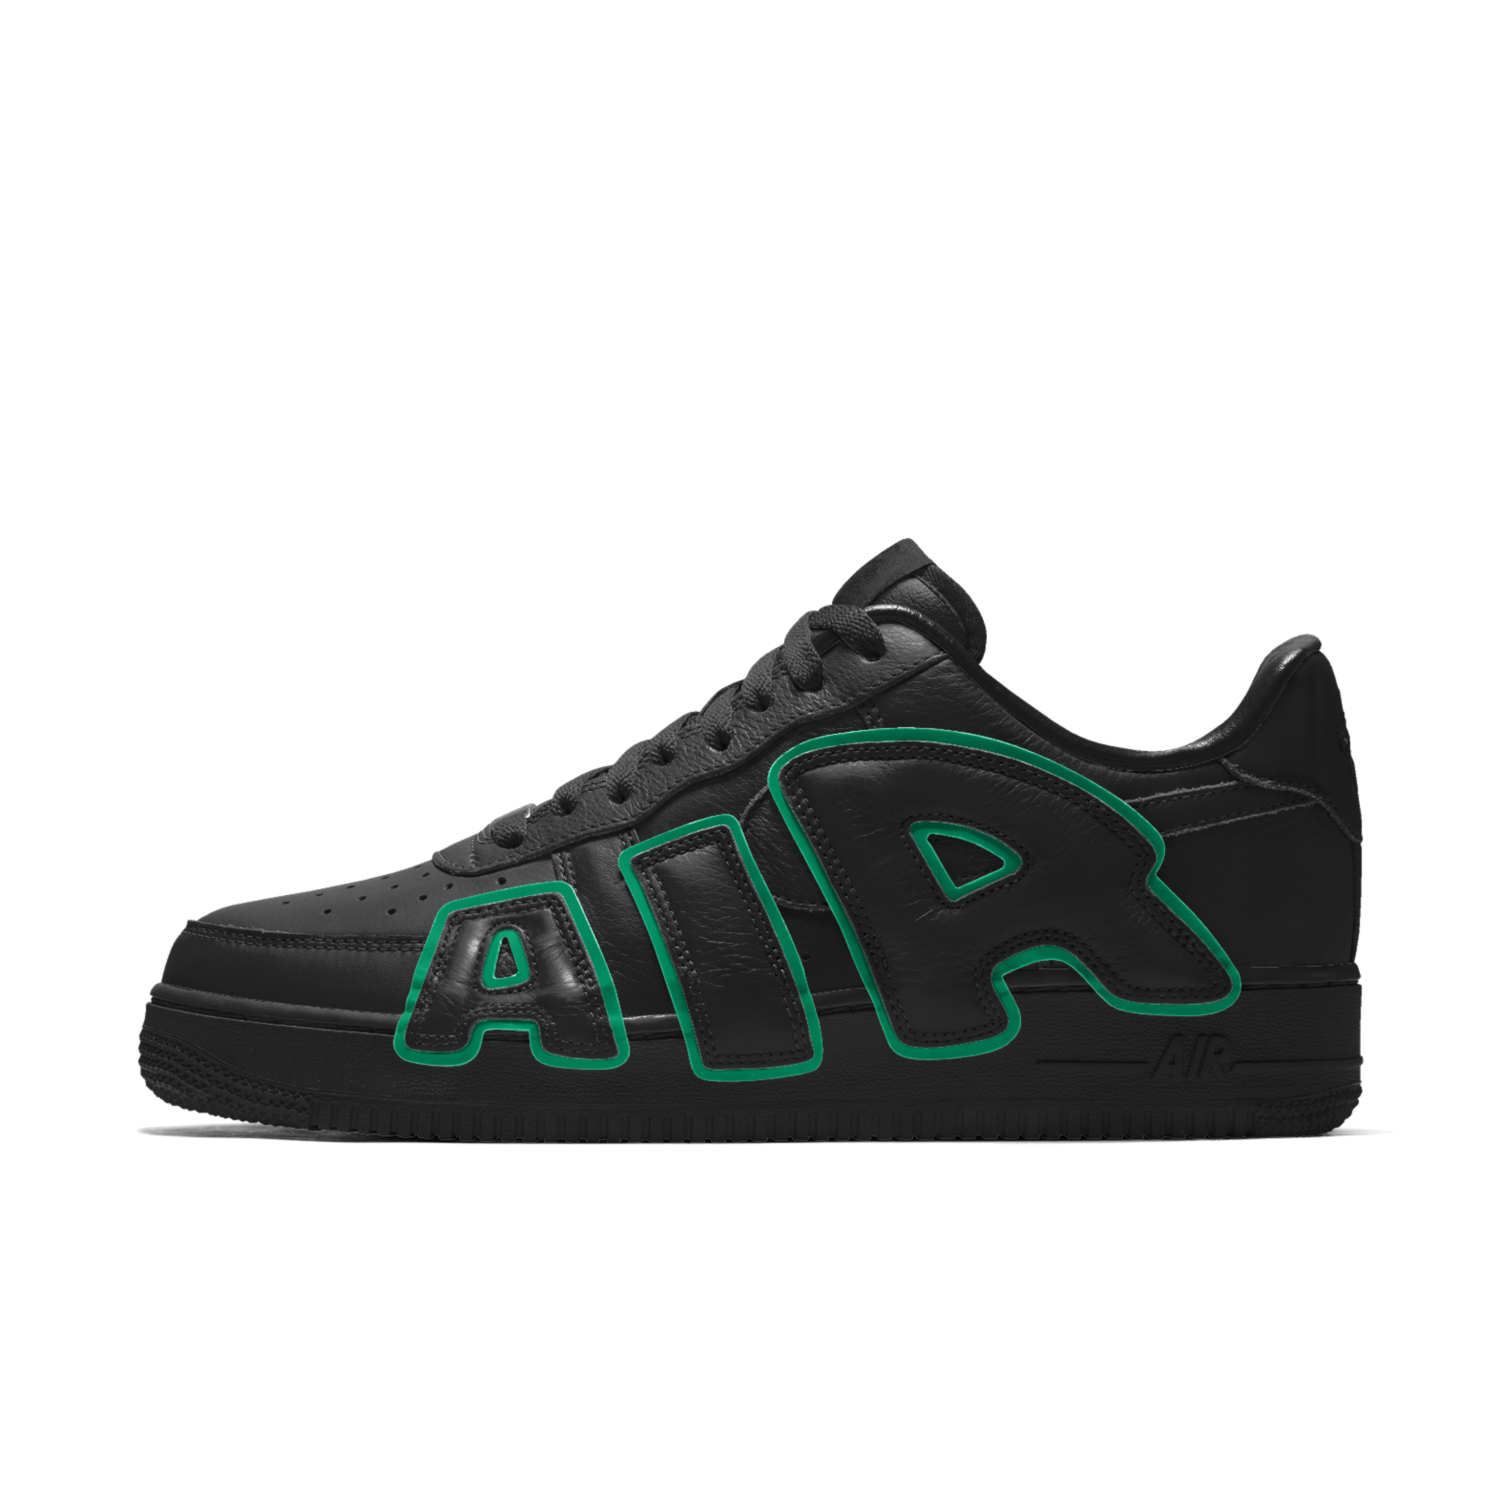 Nike x CPFM Air Force 1 Black Size 10.5 **IN HAND & SAME DAY SHIPPING!**